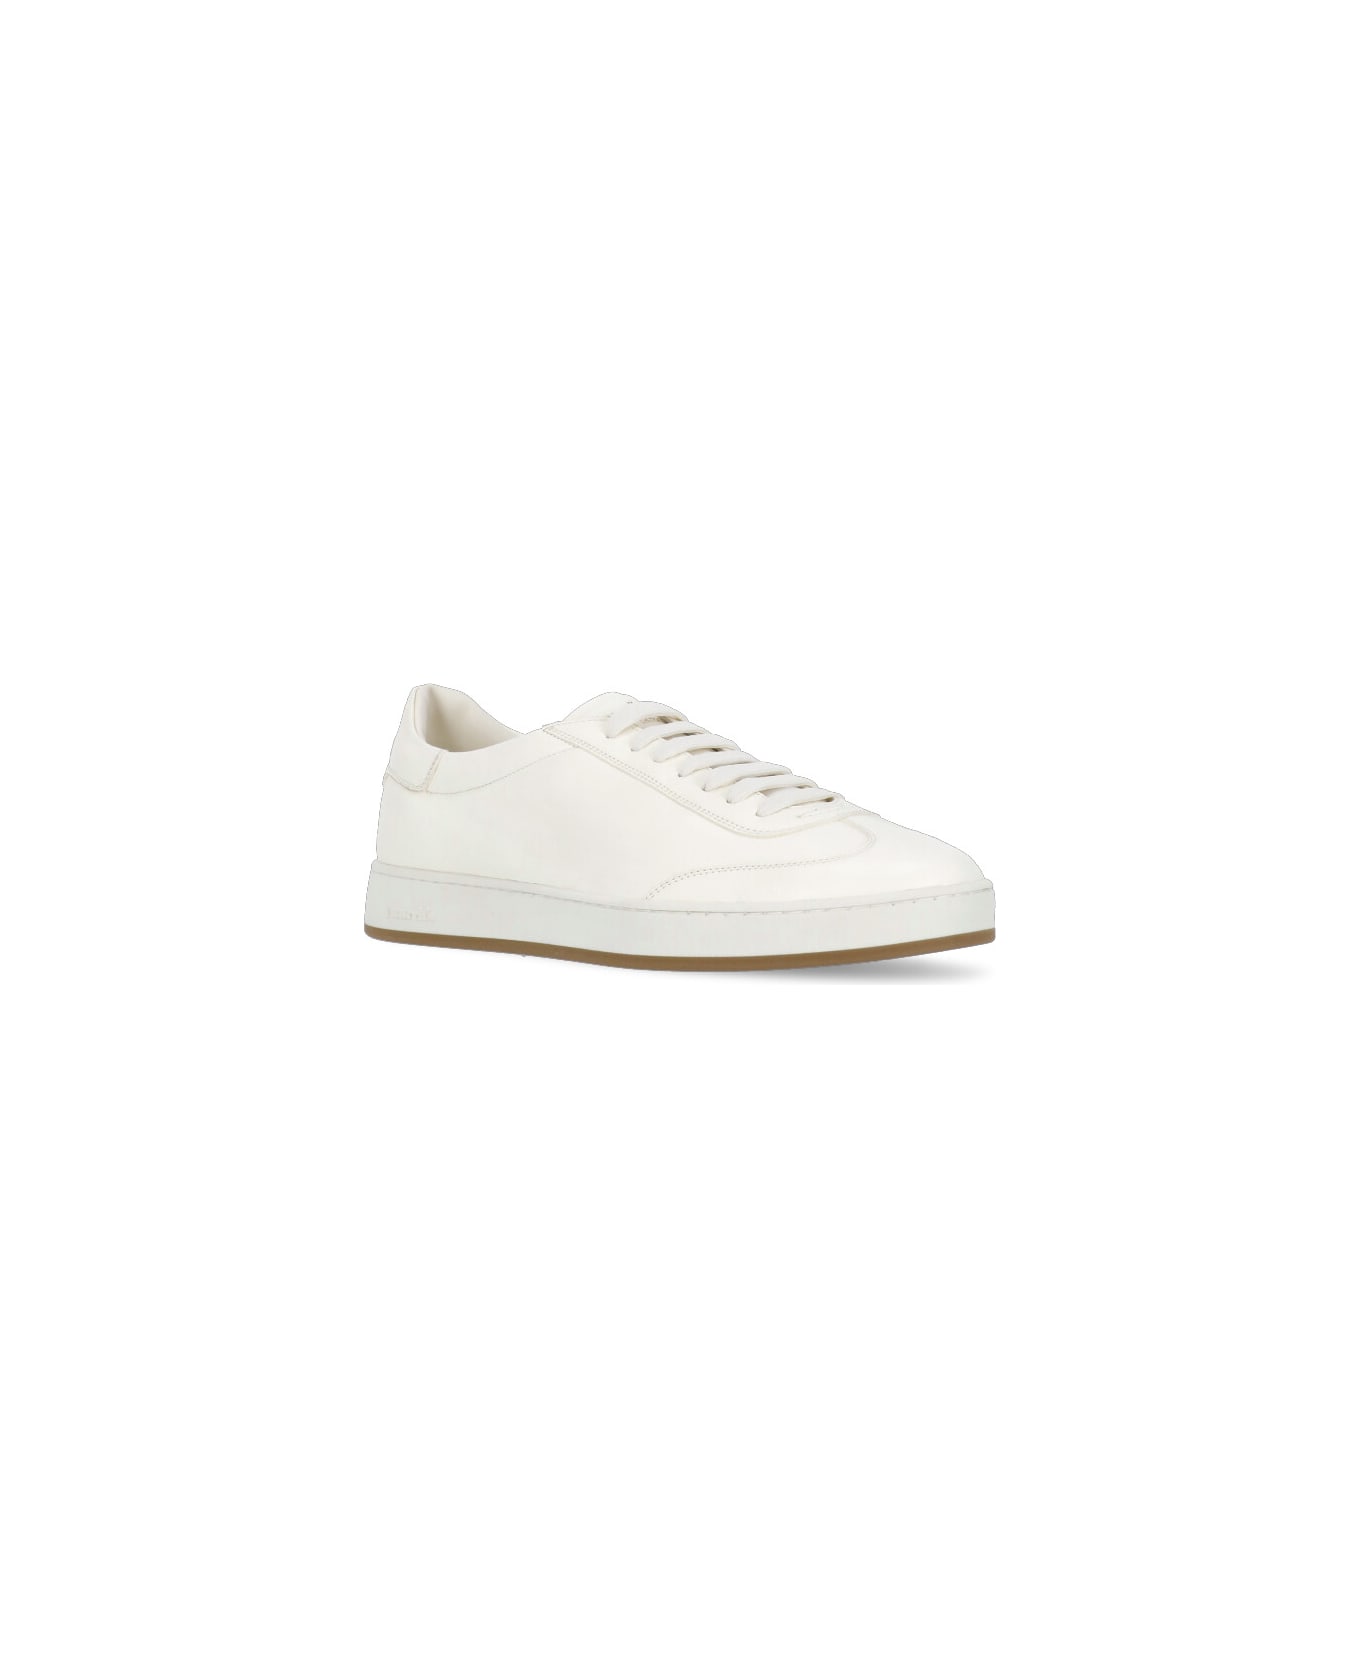 Church's Largs 2 Sneakers - Ivory スニーカー